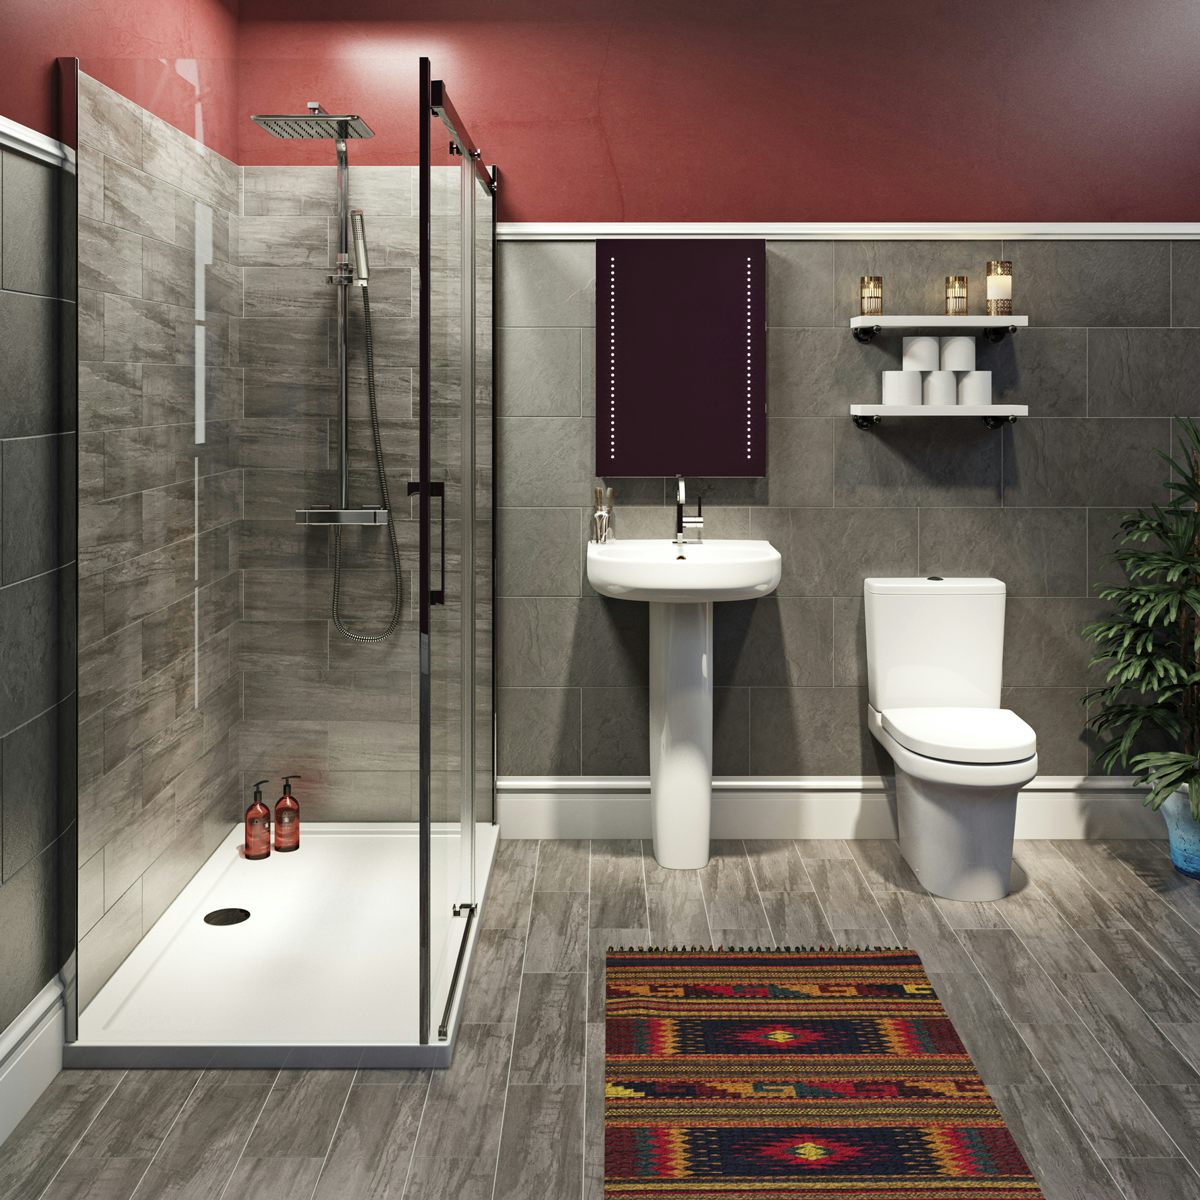 Mode Burton complete bathroom suite with enclosure, tray, shower and taps 1600 x 900